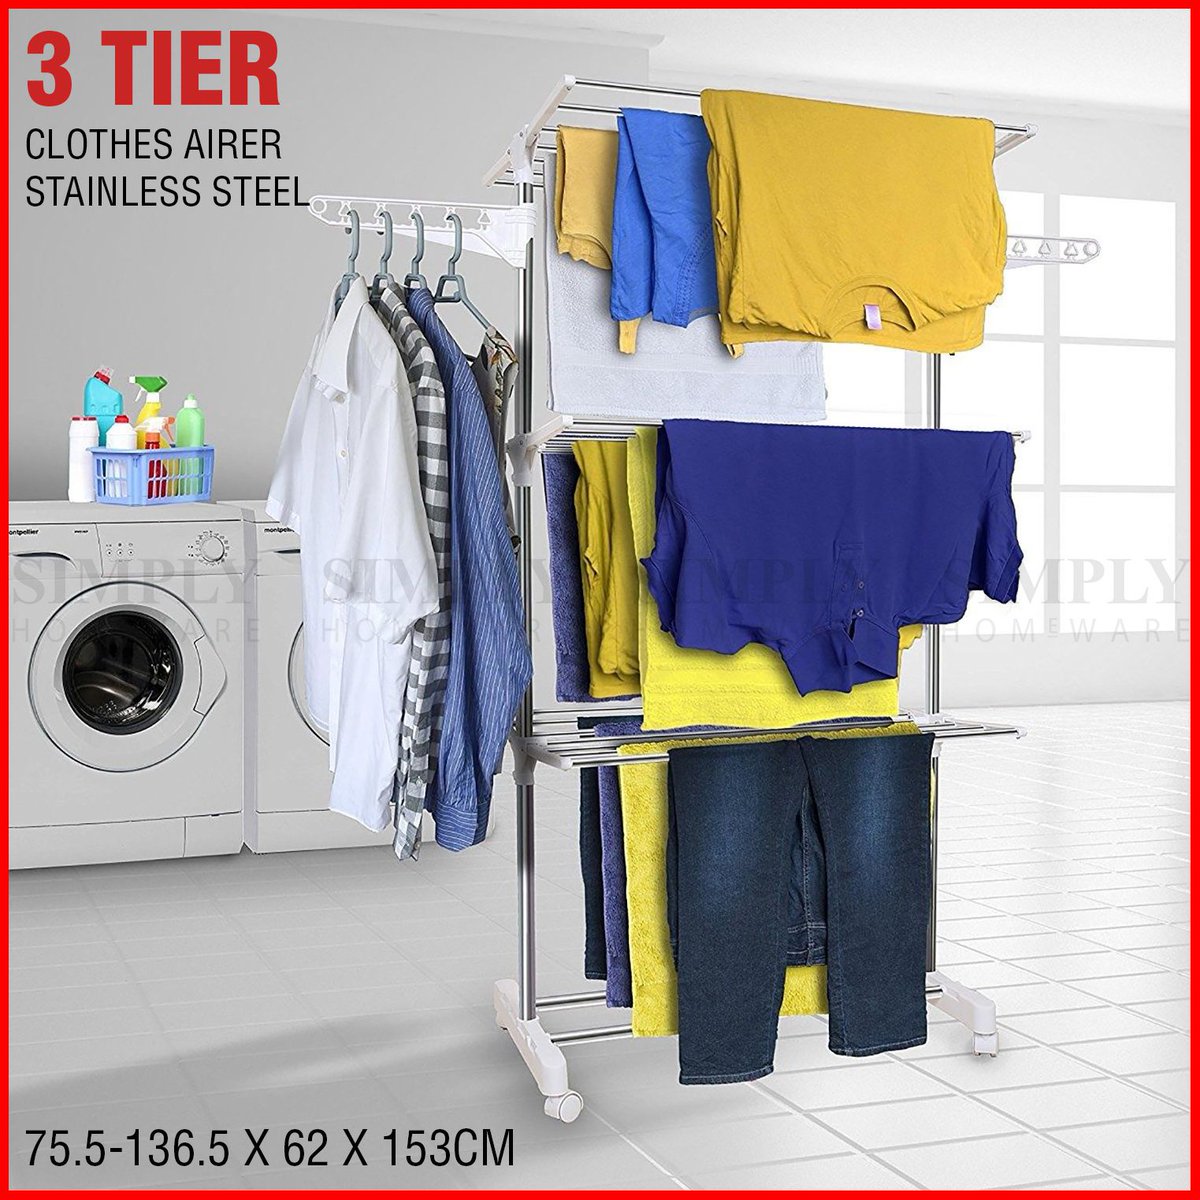 3 Tier Folding Clothes Airer Drying Rack, Design Allows For Maximum Drying Area Within A Confined Space. Modular Design For Optimum Drying. #ClothesAirer #3TierFoldingClothesAirer #ClothesDryingRack #FoldingClothesAirer #DryingRack https://t.co/h8r2DZHfia